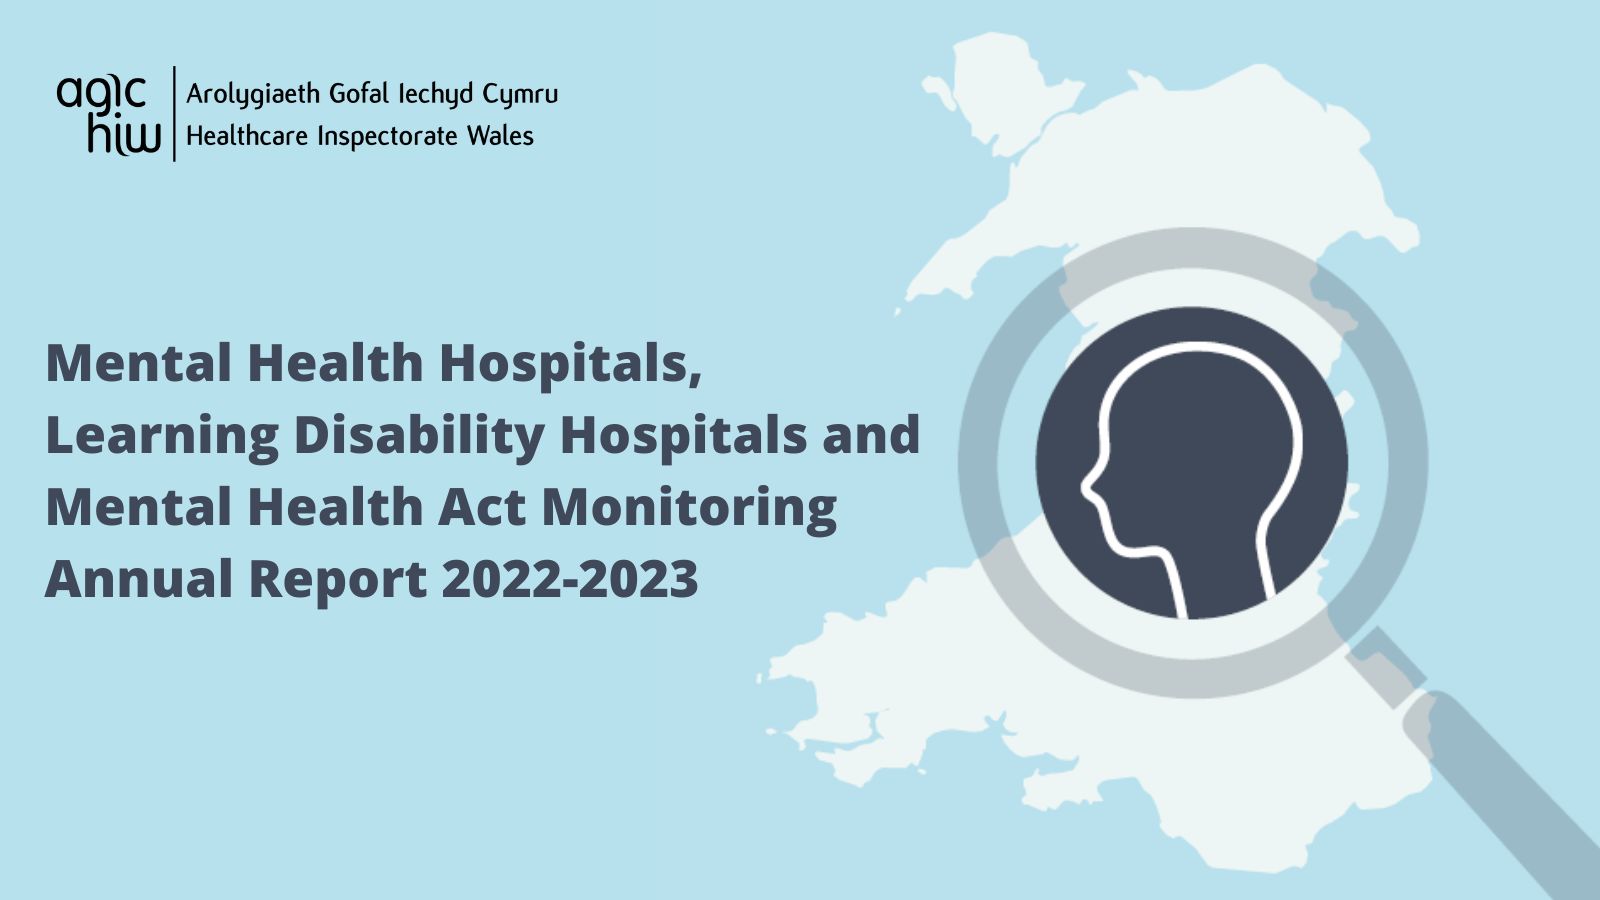 Mental Health Hospitals, Learning Disability Hospitals and Mental Health Act Monitoring Annual Report 2022 - 2023 